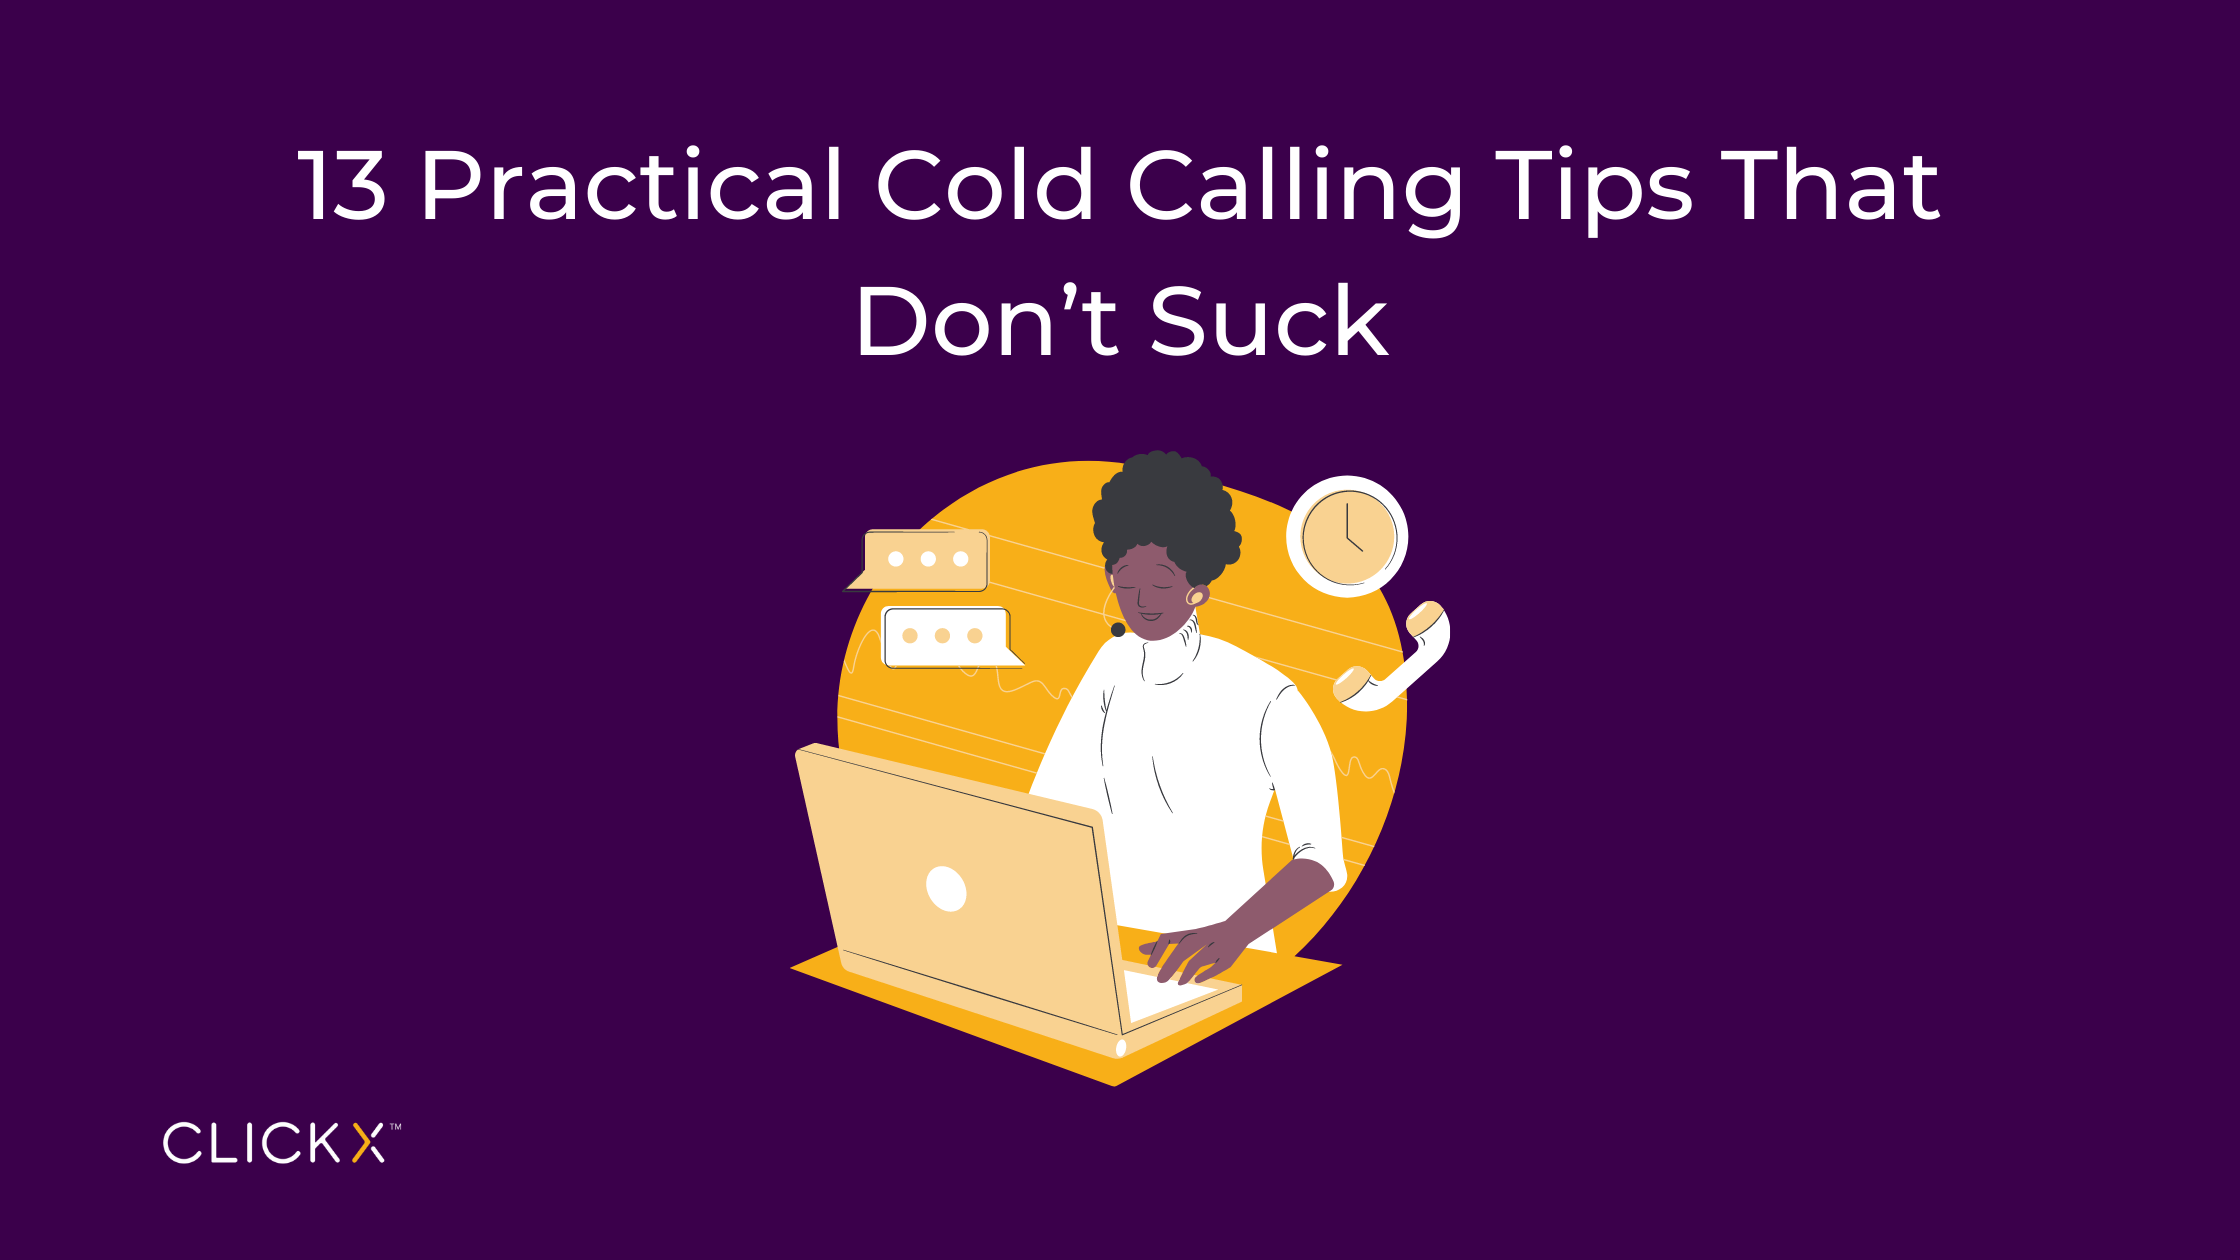 No Thanks, I Don't Want Your Business - Cold Call Coach